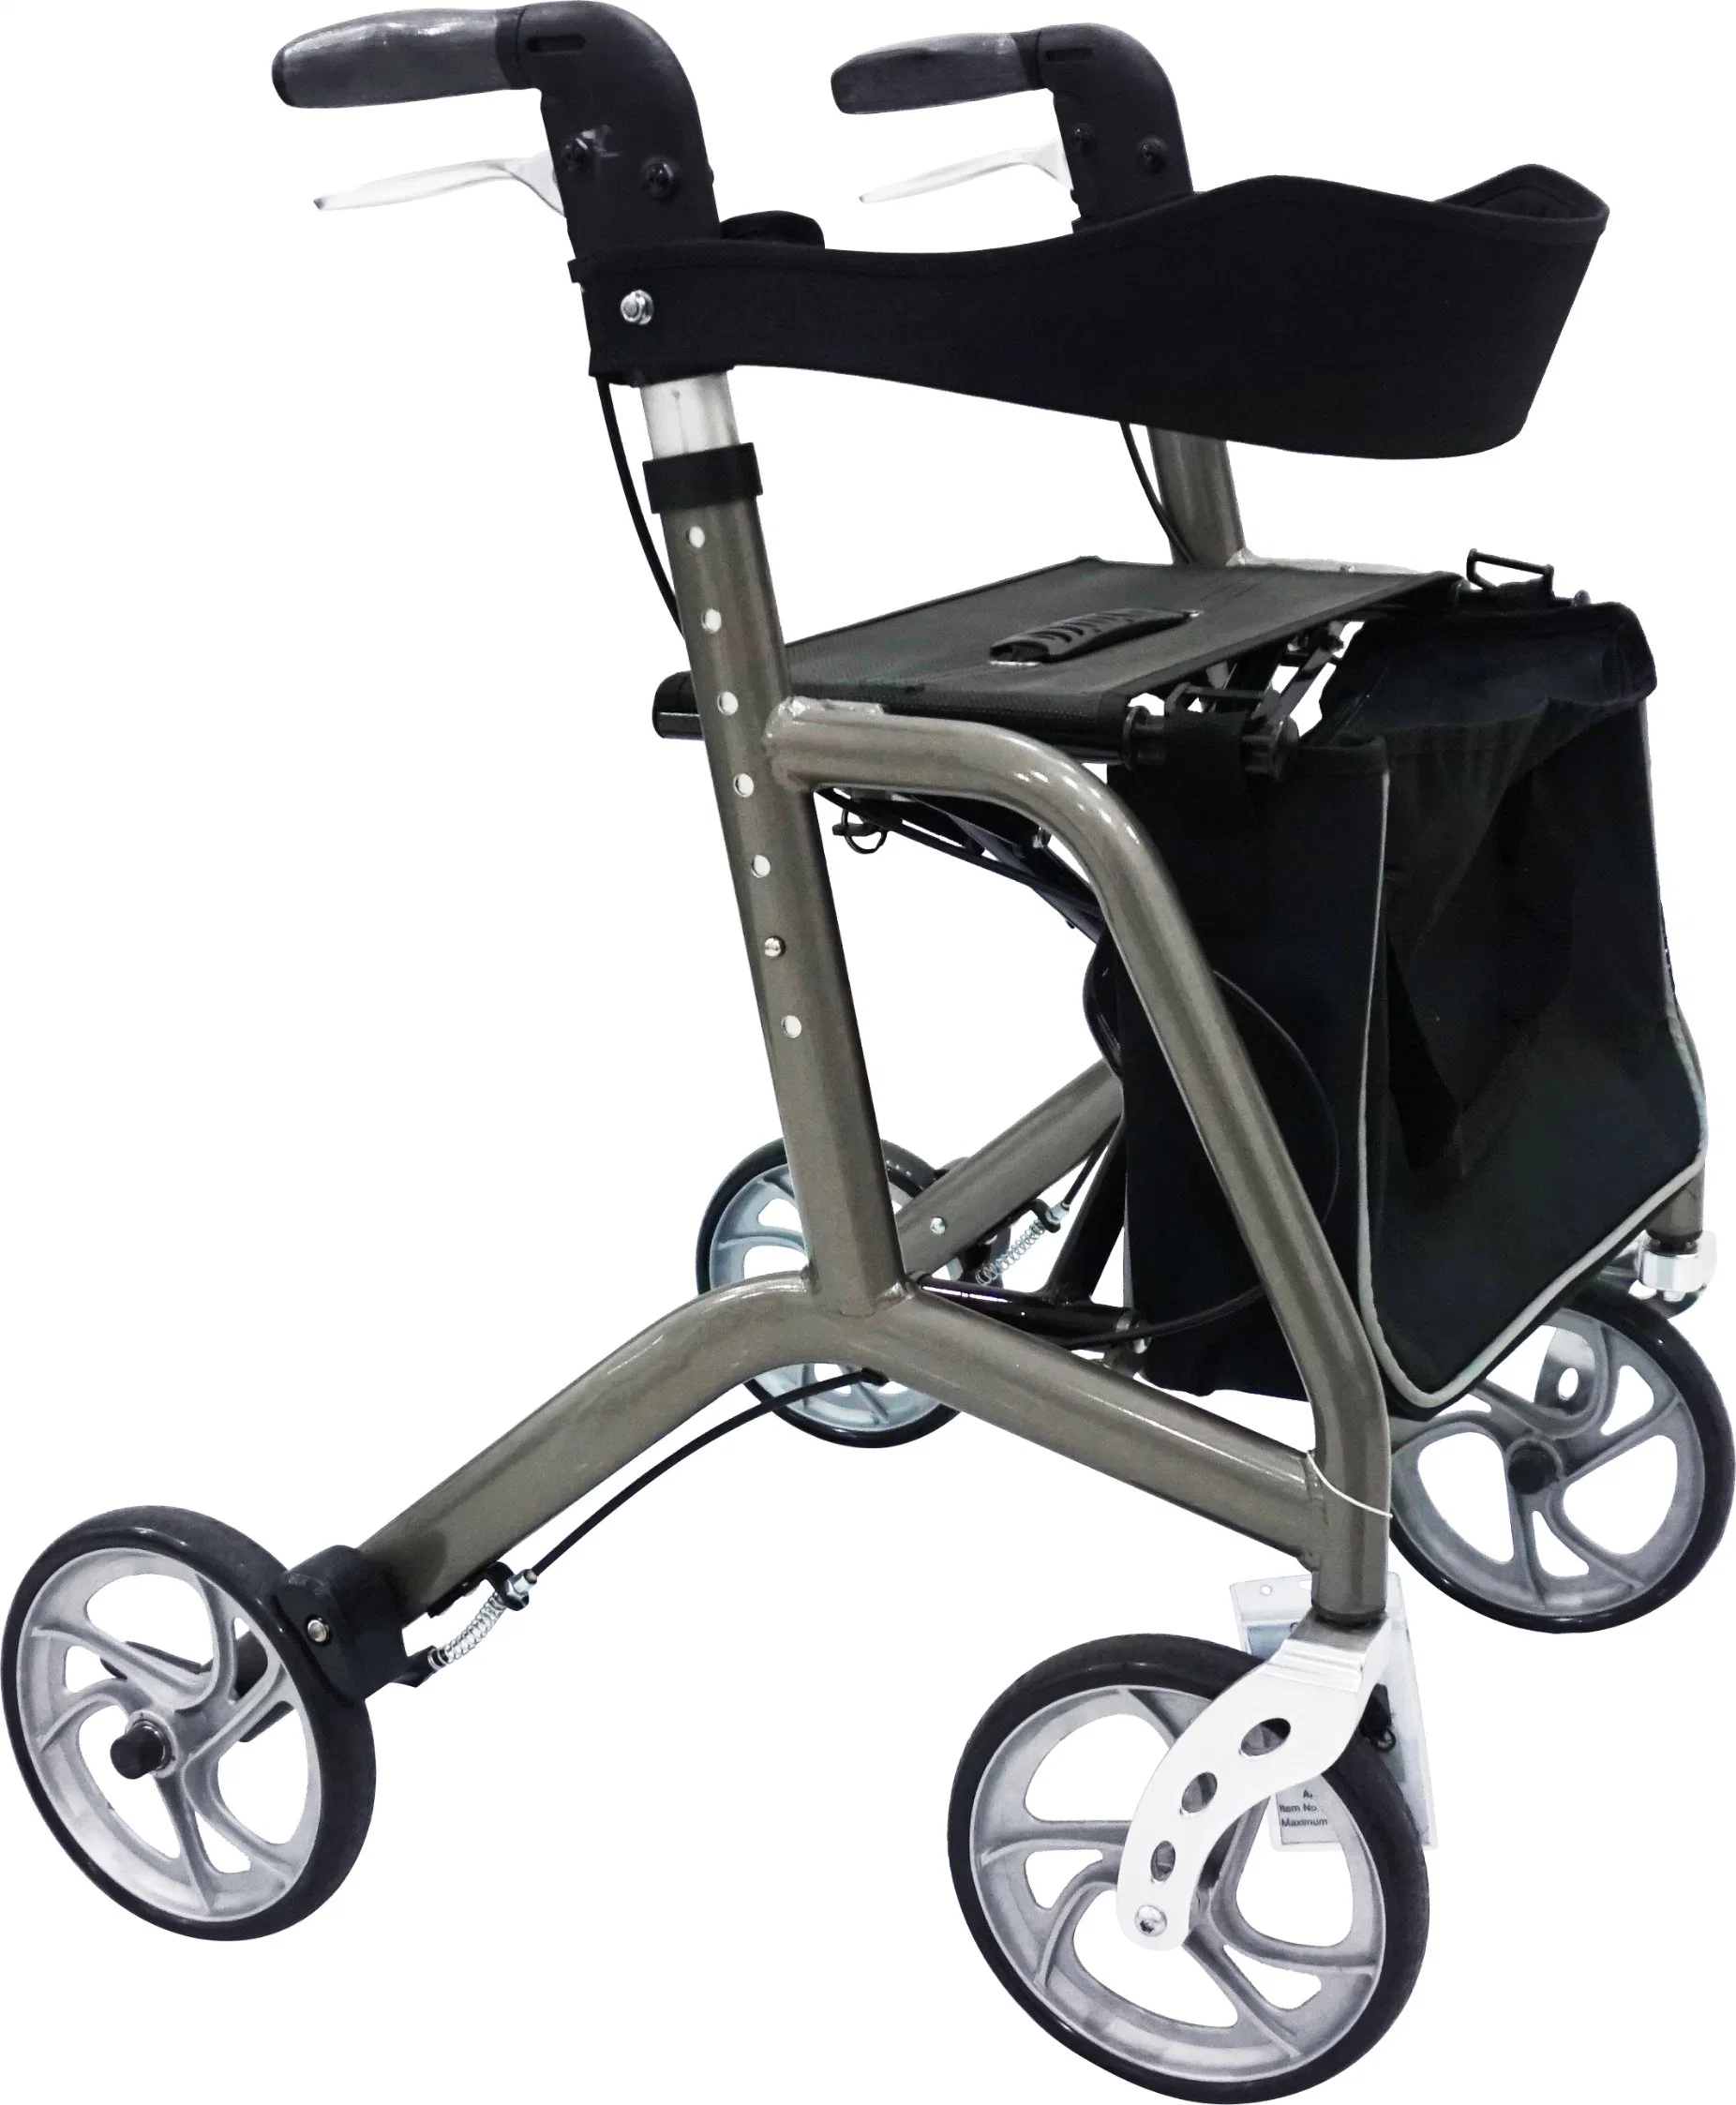 Heinsy Medical RW-8861 Foldable Rollator Walker with Seat